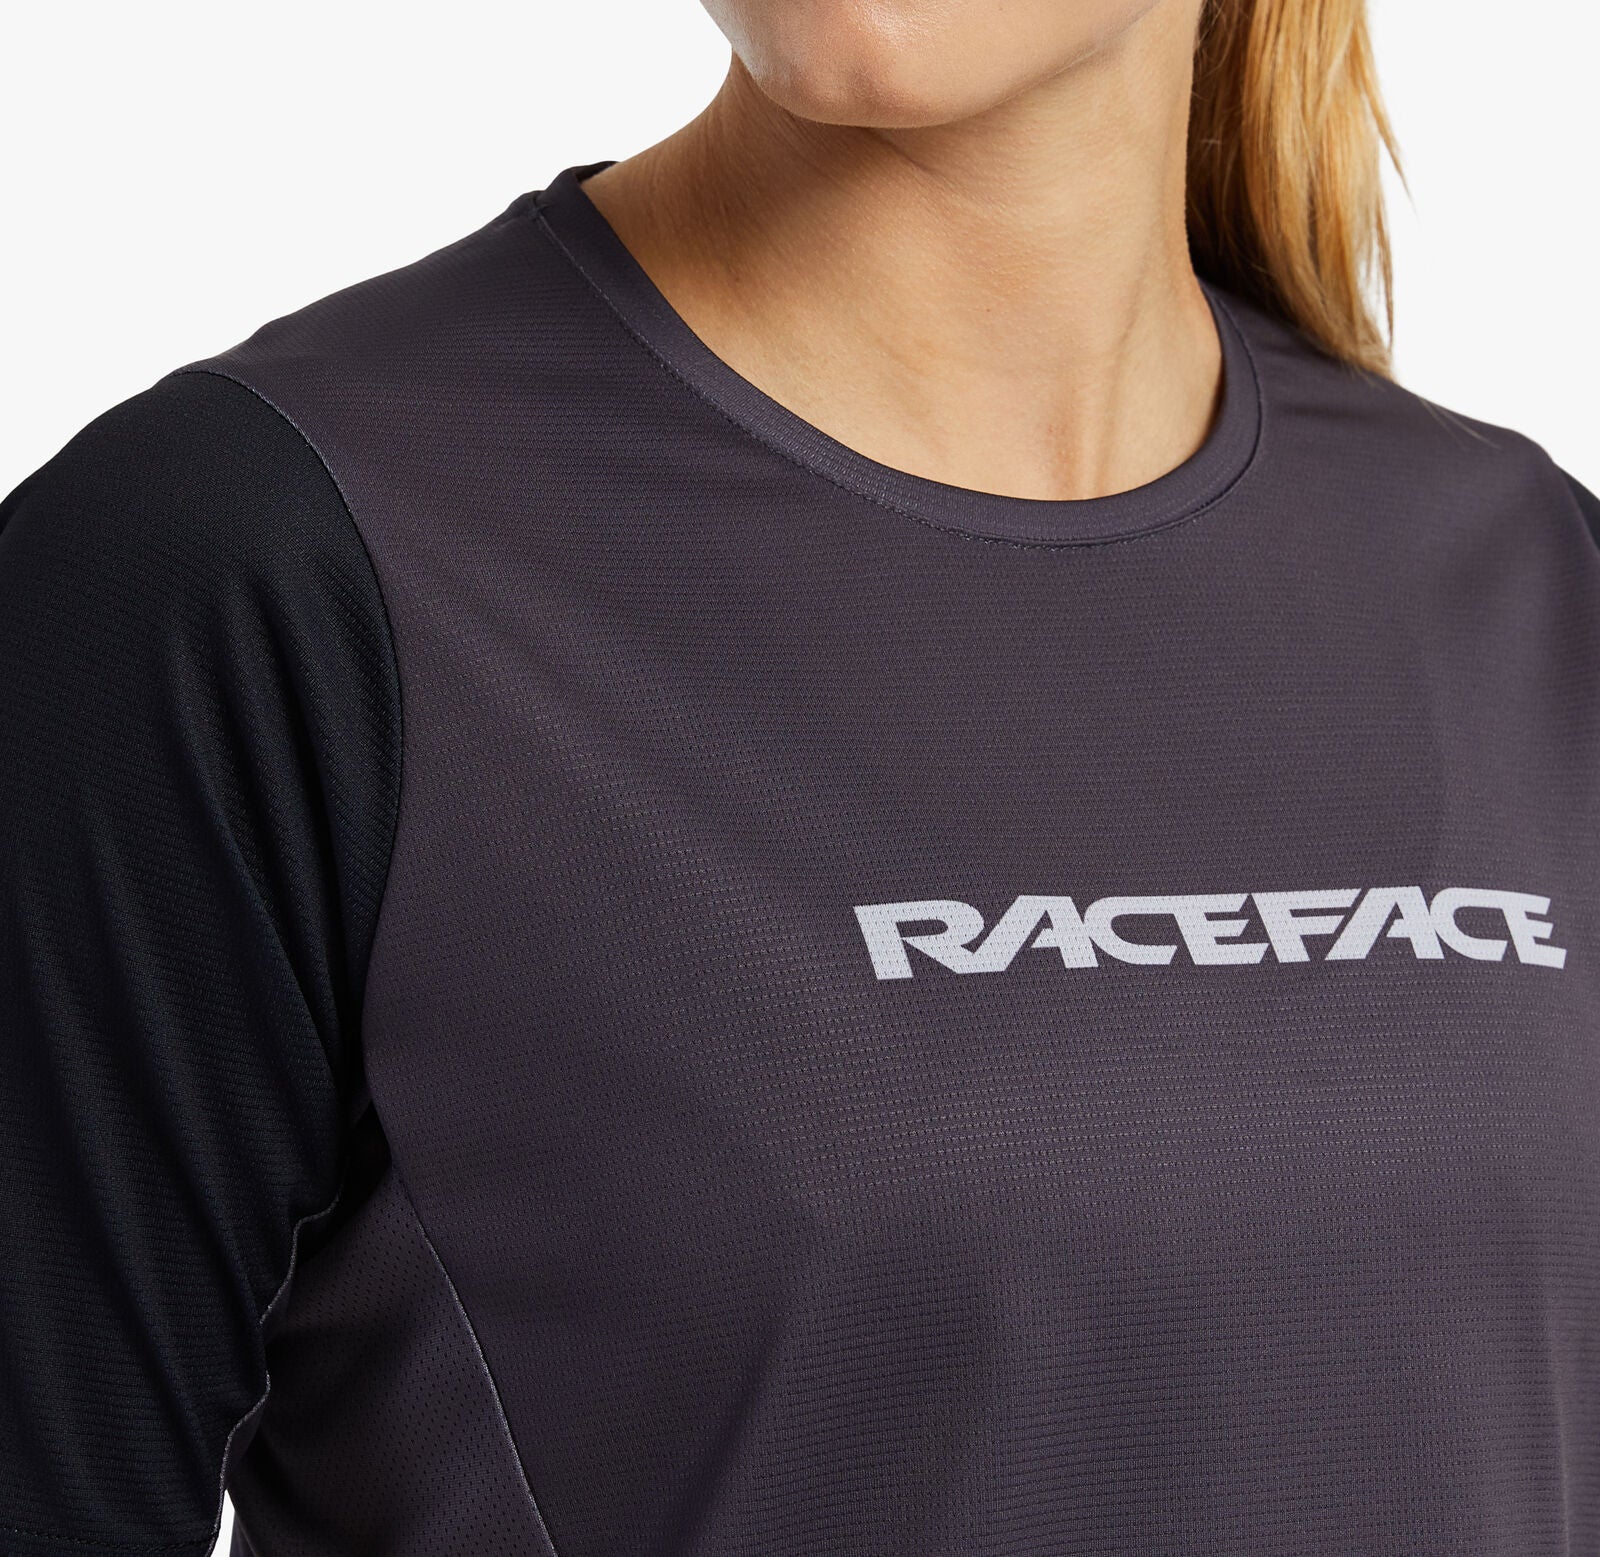 Race Face Indy Cycling Jersey / Top Gray / Charcoal M